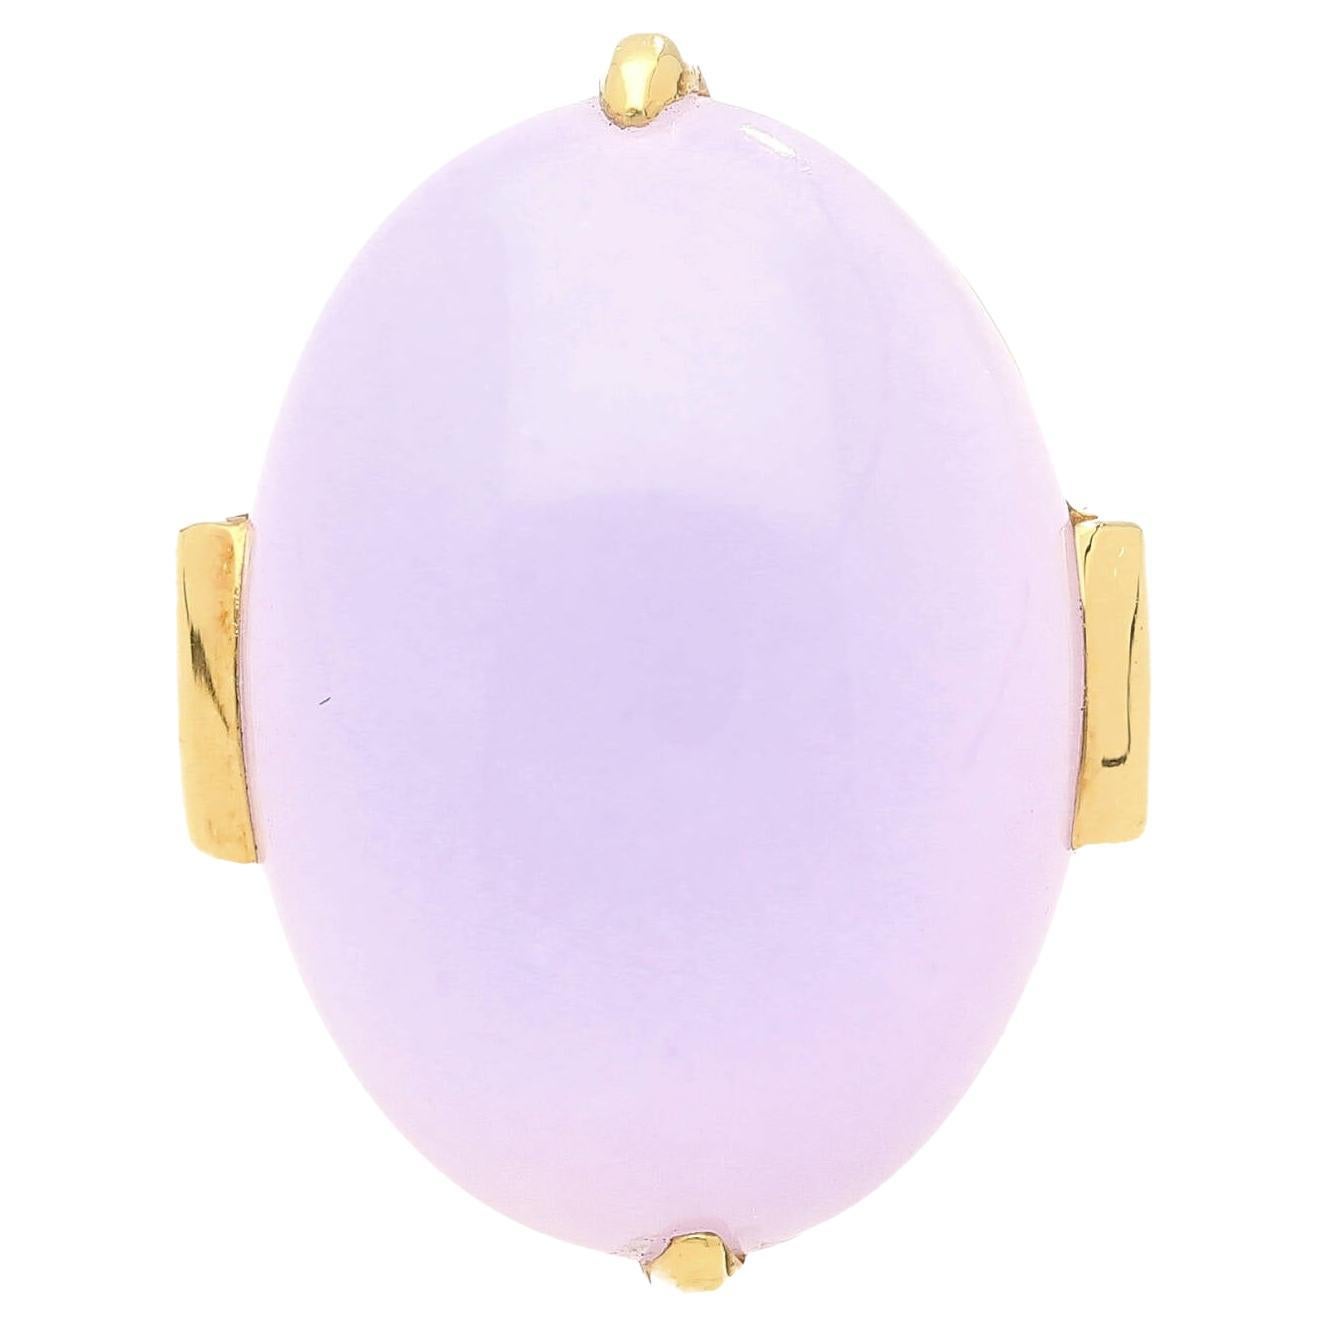 Mid-20th Century "Gumps" Signed 23.94 Carat Lavender Jade and Yellow Gold Ring For Sale